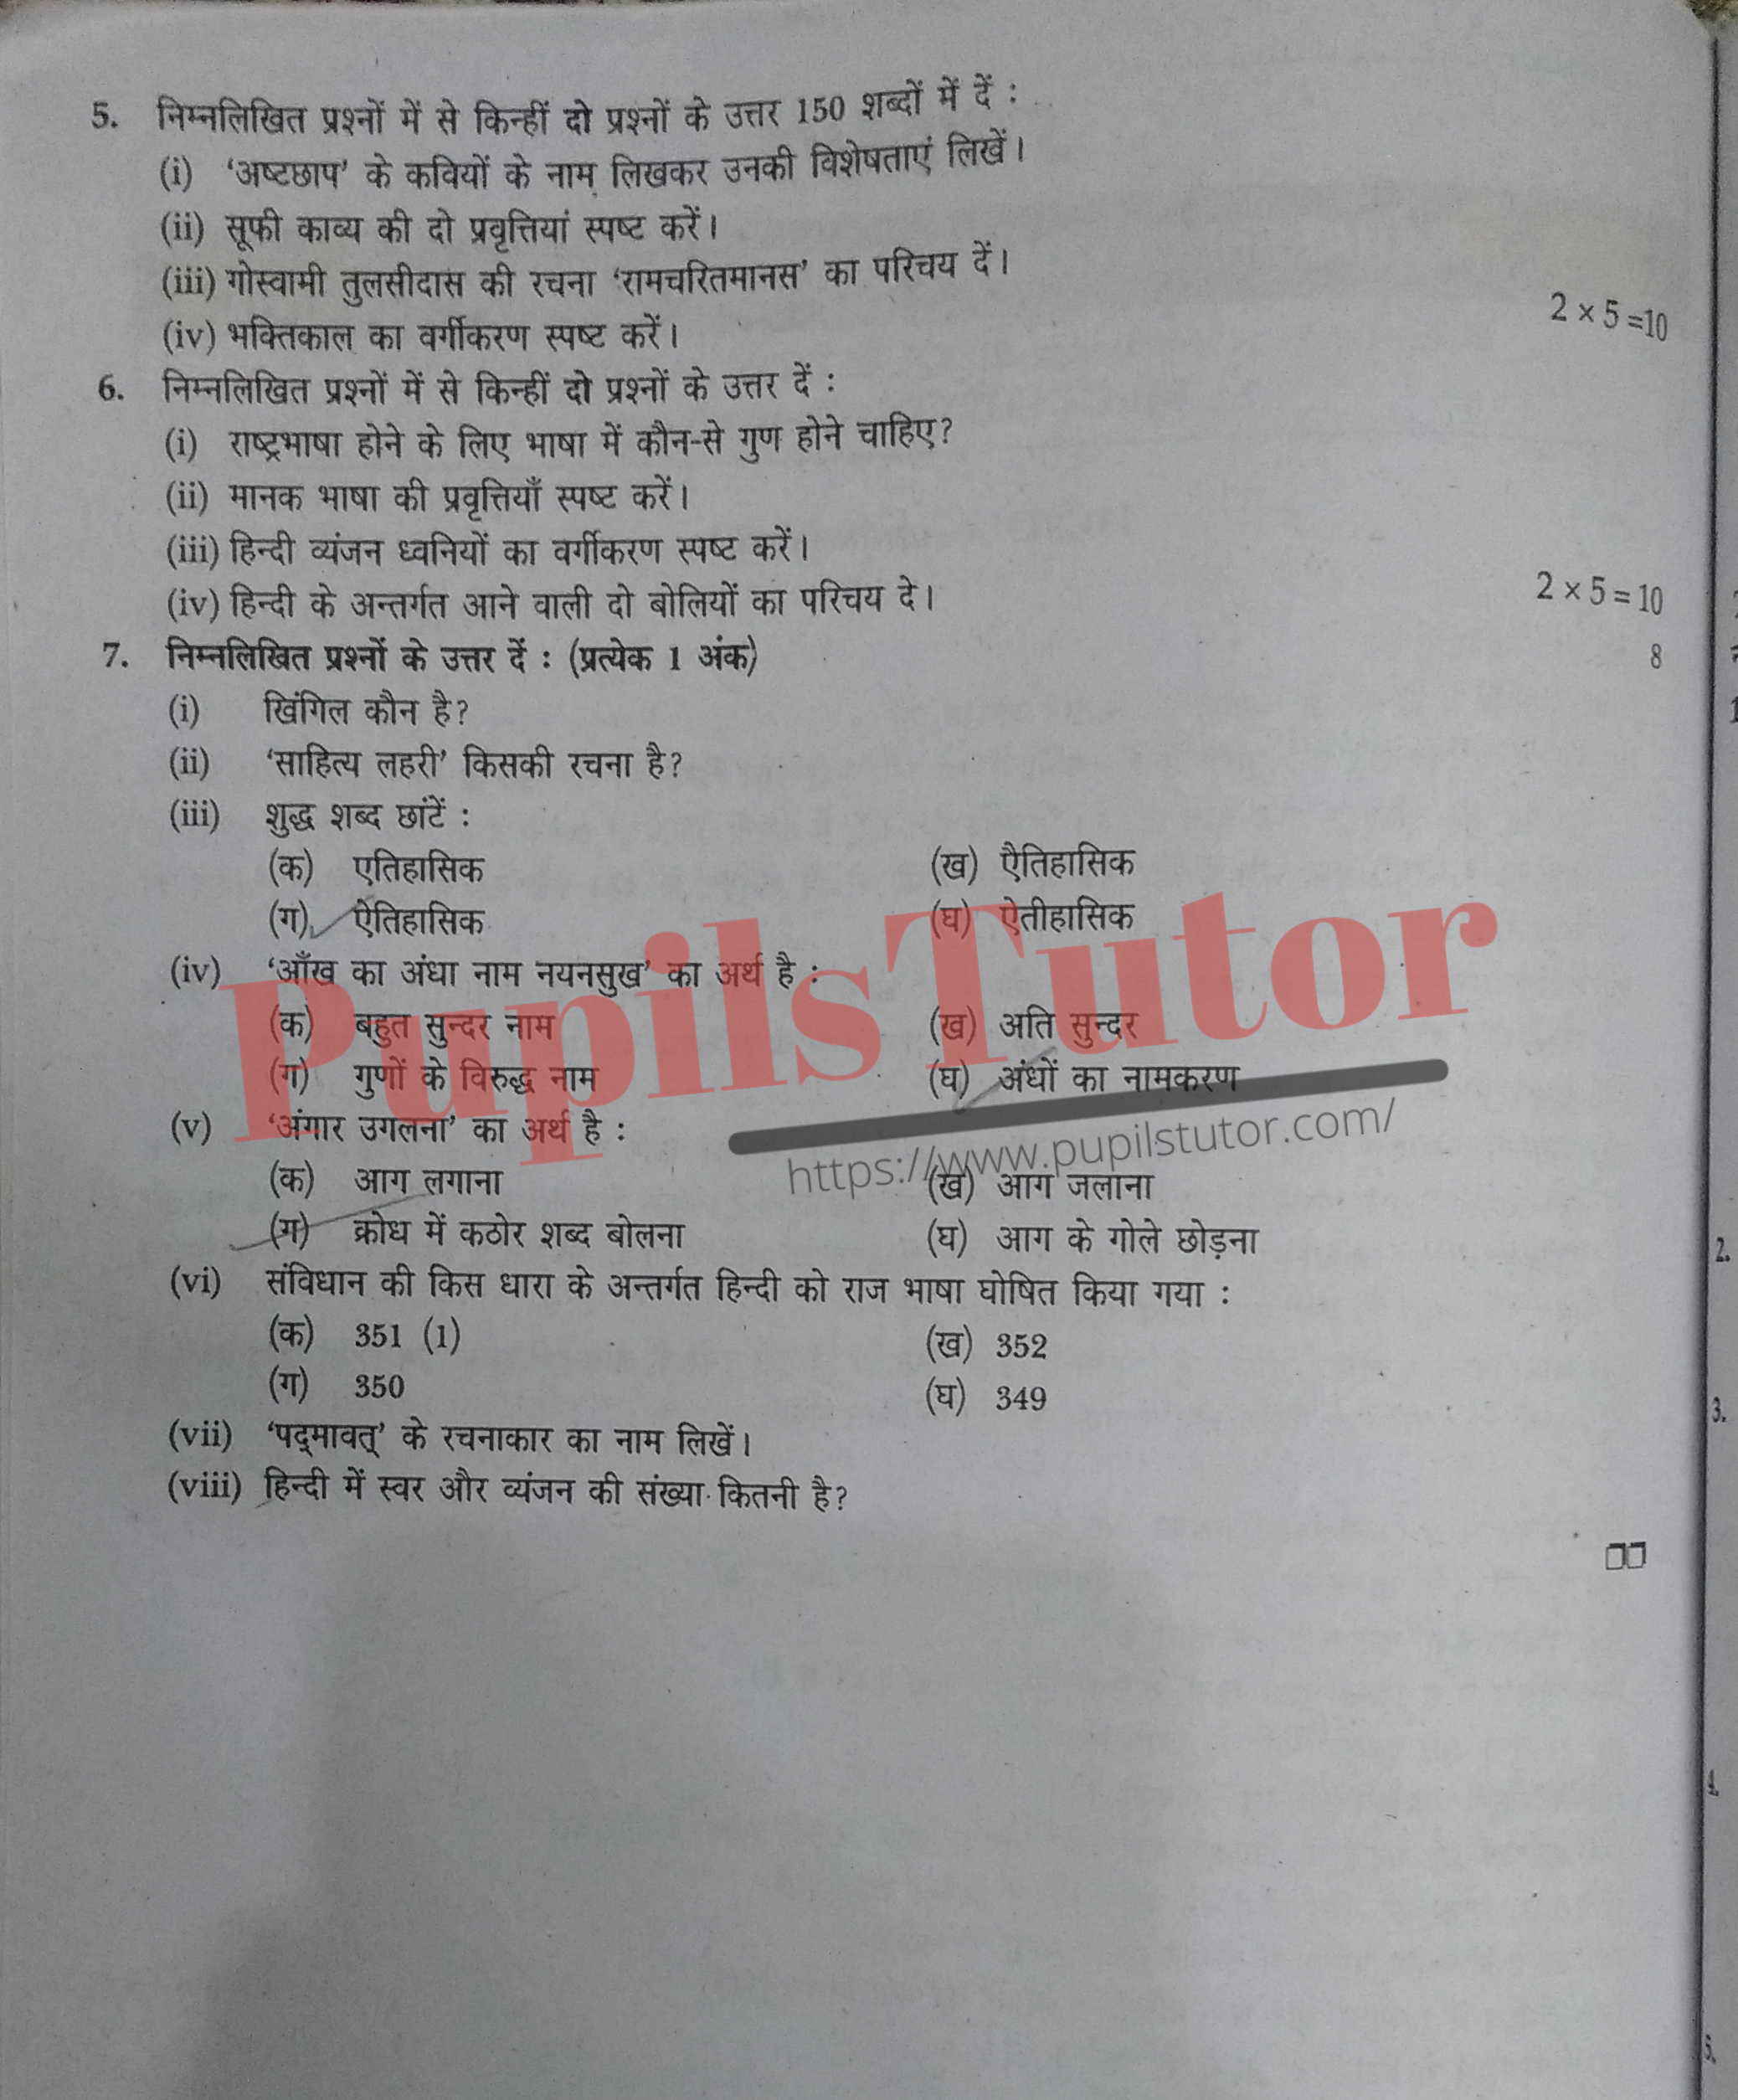 M.D. University B.A. Hindi (Compulsory) Second Semester Important Question Answer And Solution - www.pupilstutor.com (Paper Page Number 2)